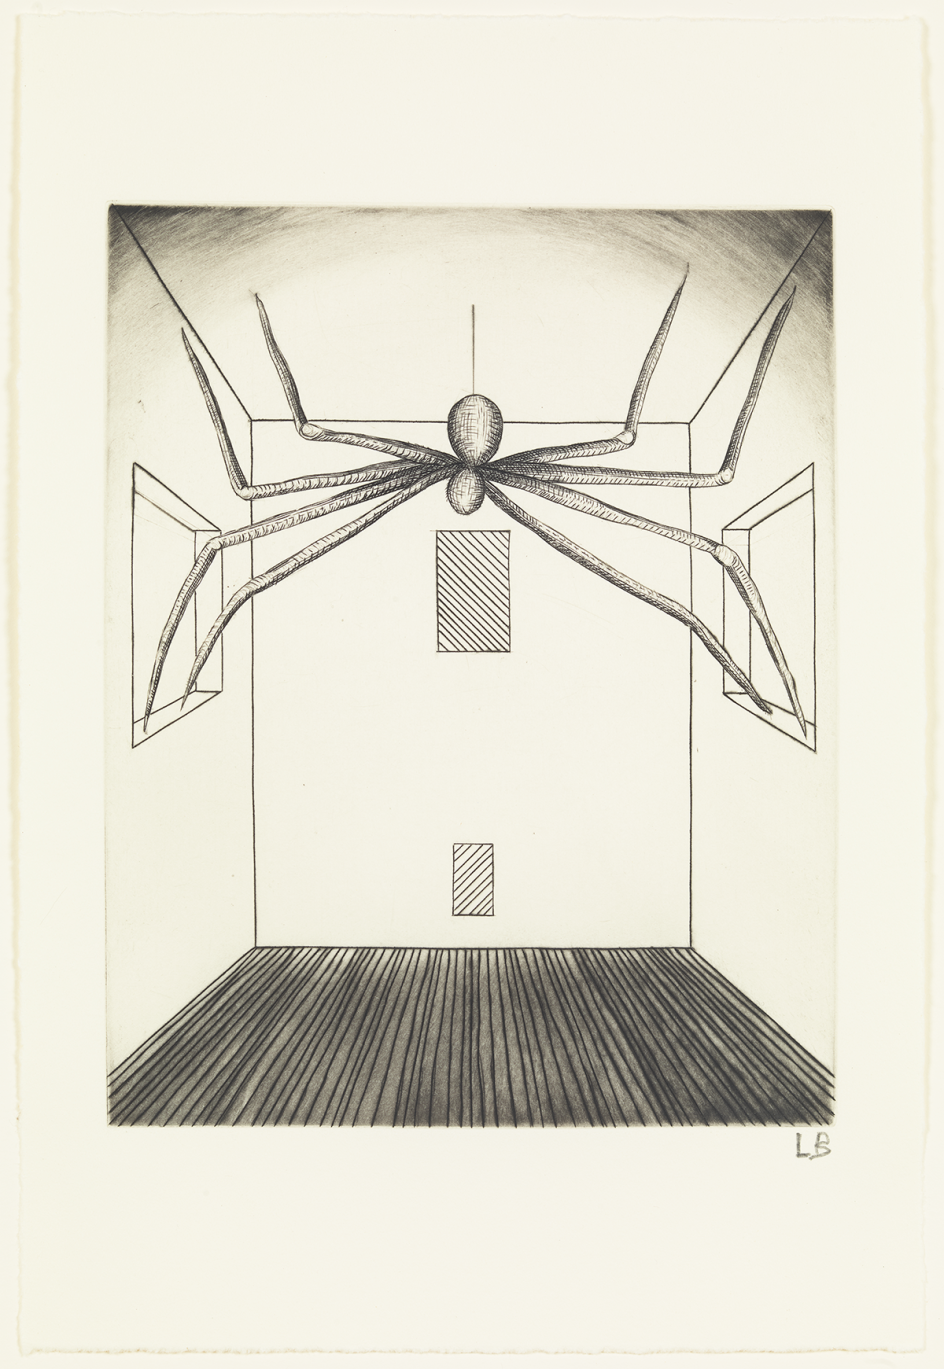 Louise Bourgeois He Disappeared Into Complete Silence, 1947 – 2005 (Detail) Suite of 11 engravings with aquatint and hand colouring accompanied by letterpress text, Plates 1 – 9: 25.4 × 35.6 cm, Alternative and Spider plates: 25.4 × 17.1 cm. © Easton Foundation/DACS, London/VAGA, NY 2018. Collection: The Easton Foundation.